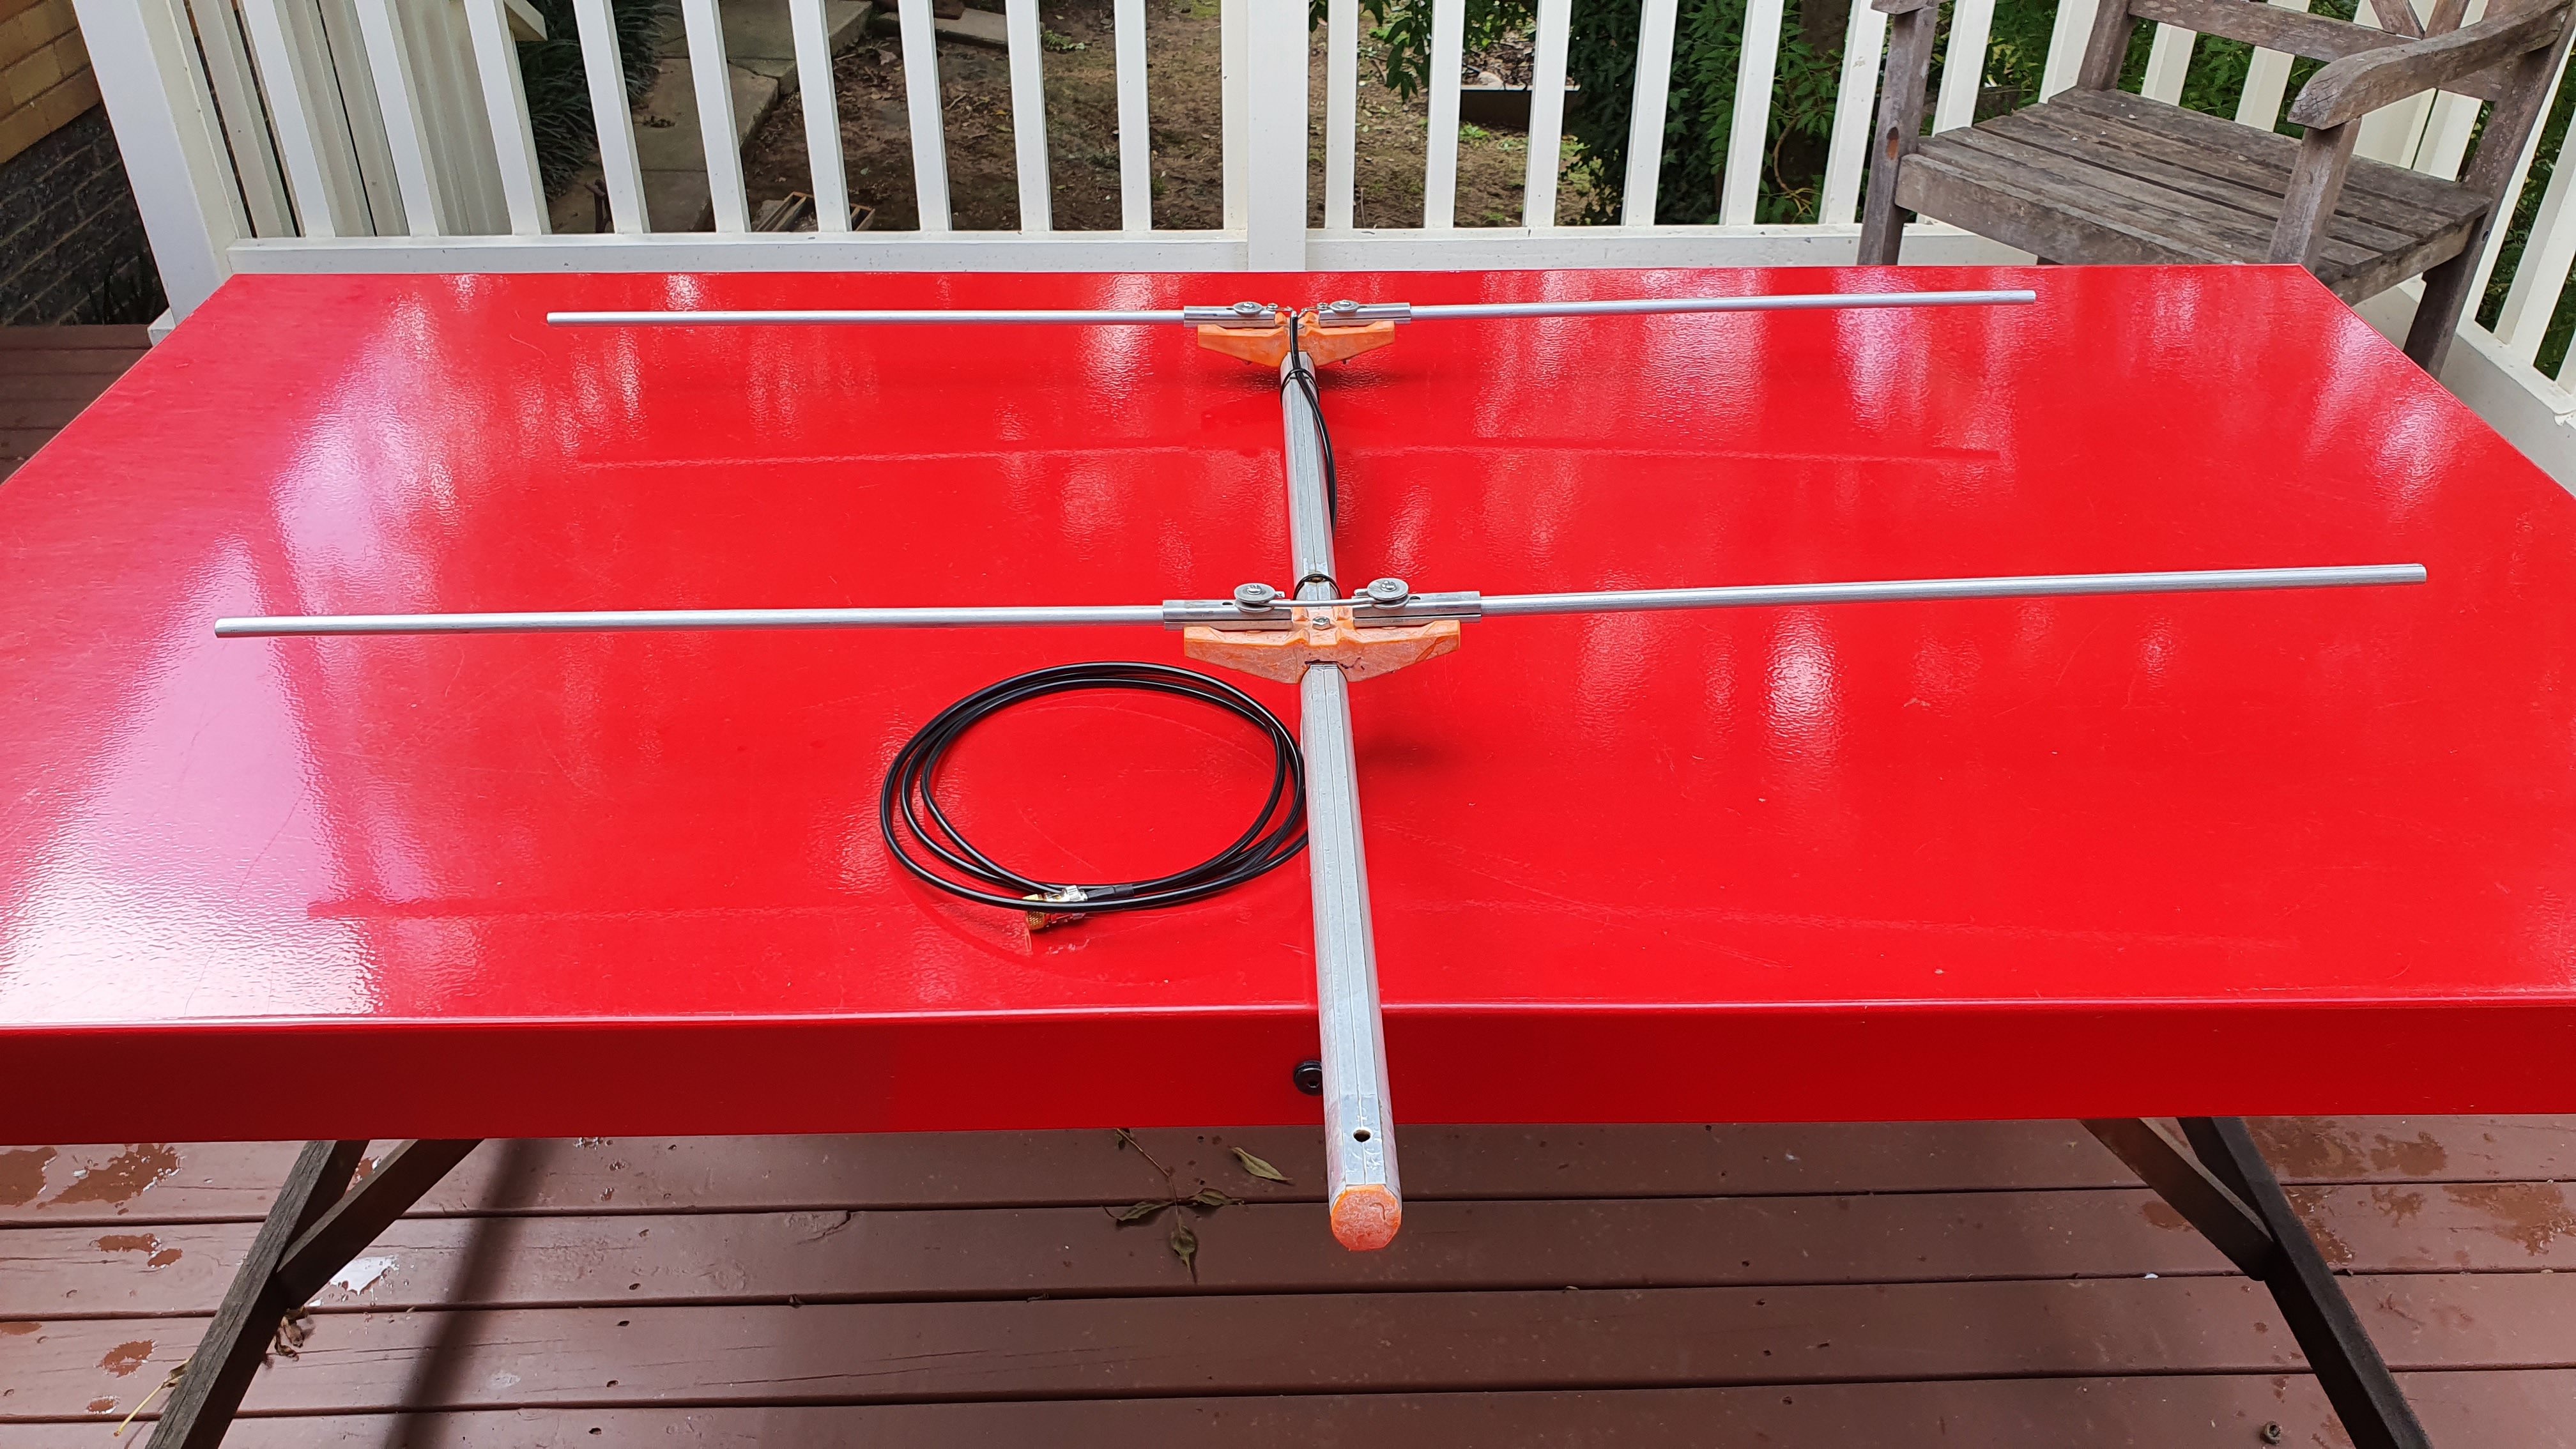 Antenna Project – Recycle an old aluminium VHF TV antenna and build
a hand-held 2m yagi for 144.2 MHz